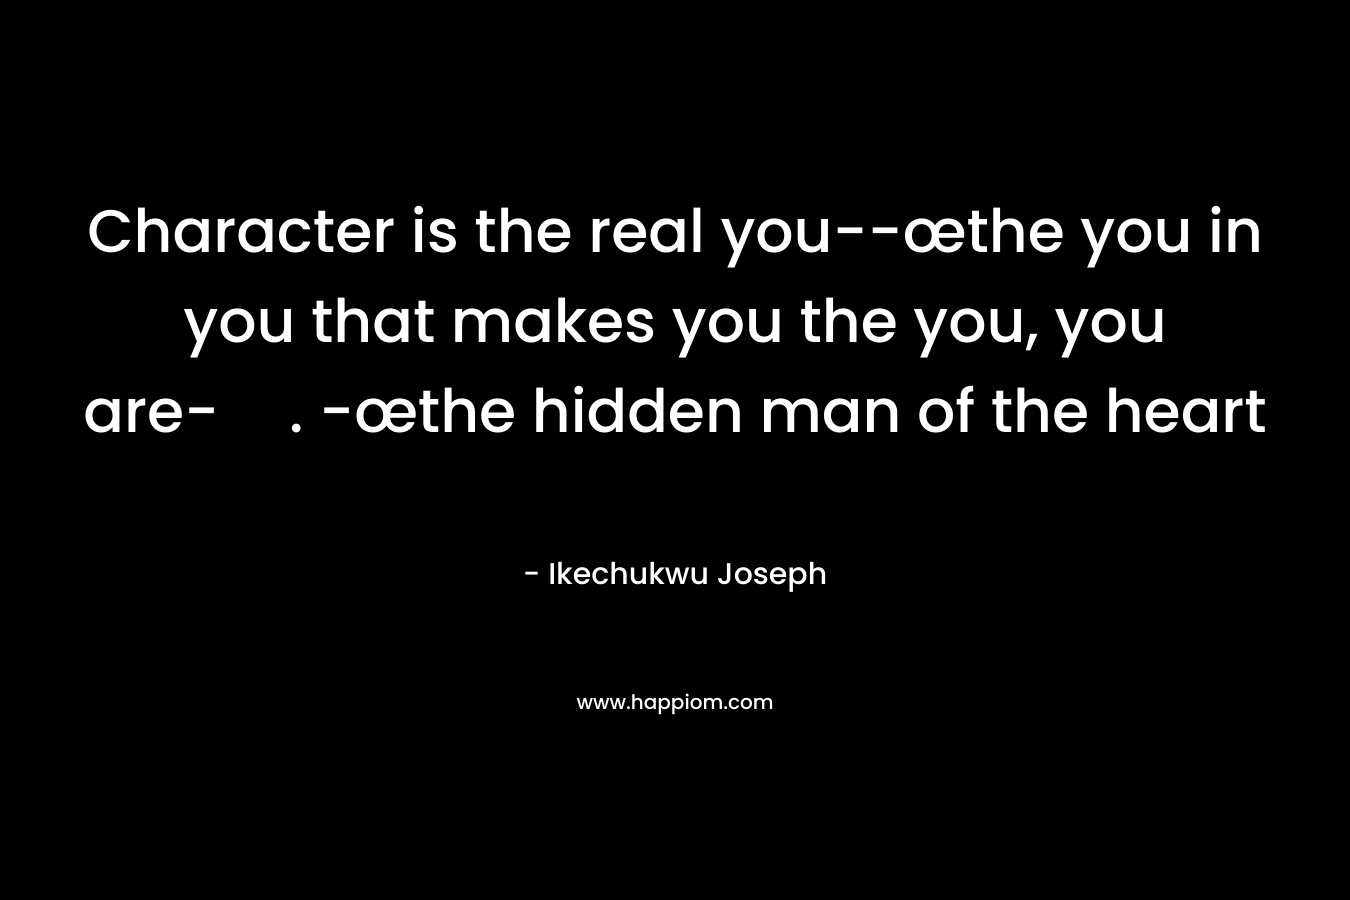 Character is the real you--œthe you in you that makes you the you, you are-. -œthe hidden man of the heart